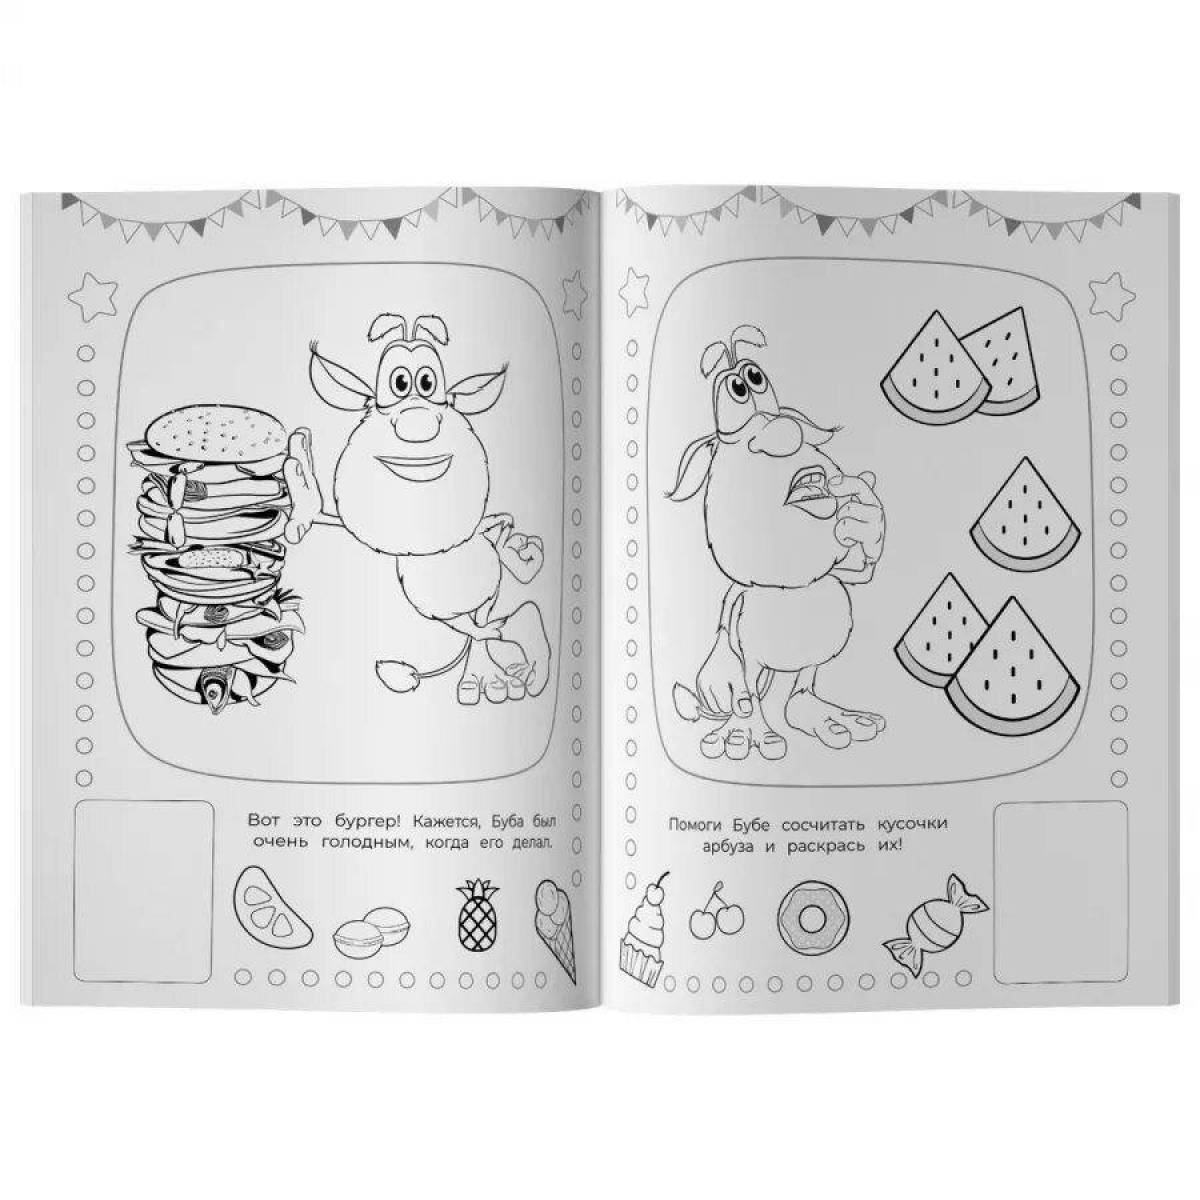 Bouba bright coloring book for kids